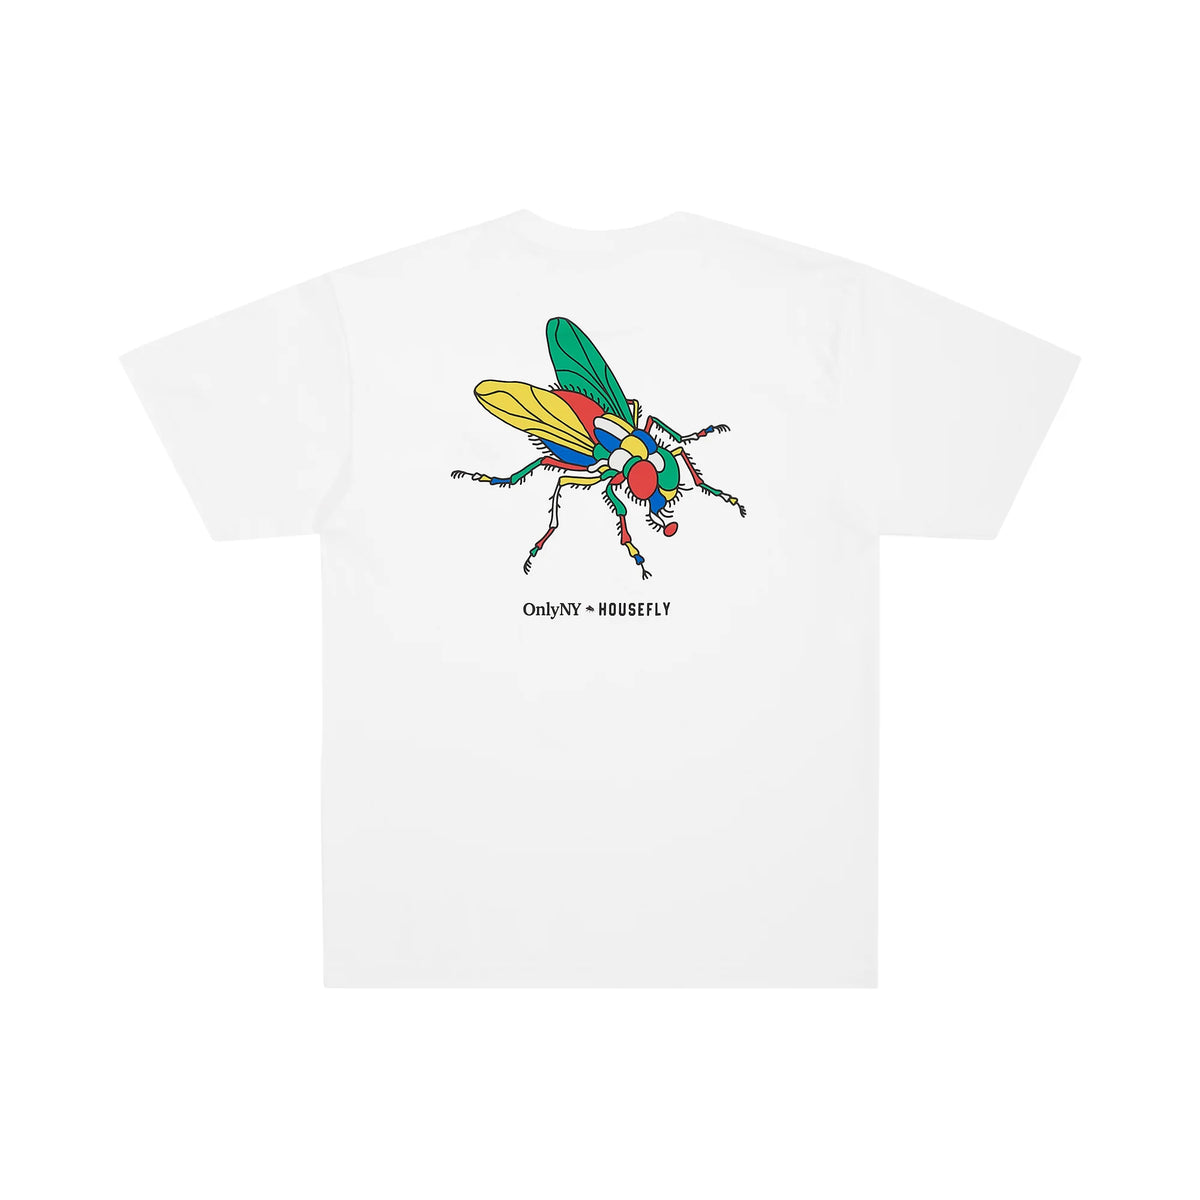 Only NY x Housefly T-Shirt